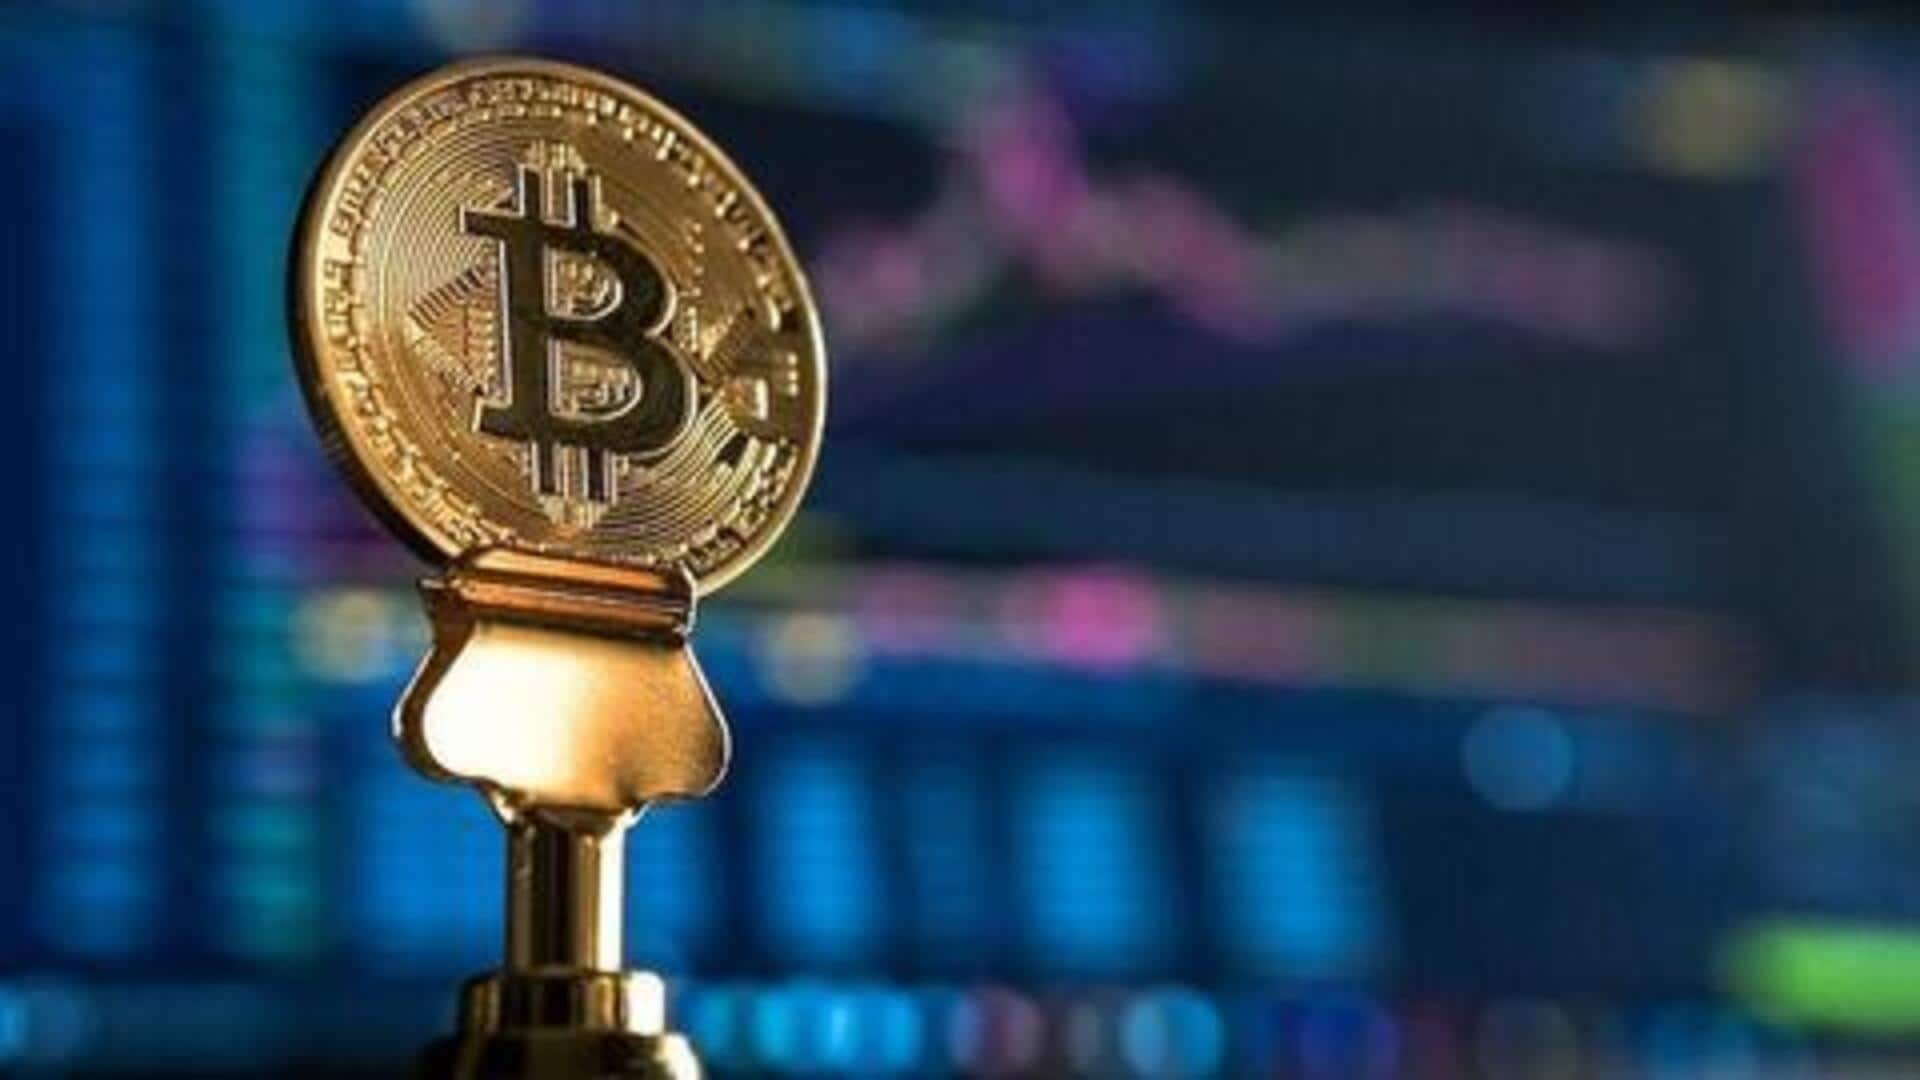 Today's cryptocurrency prices: Check rates of Bitcoin, Ethereum, Dogecoin, Polygon